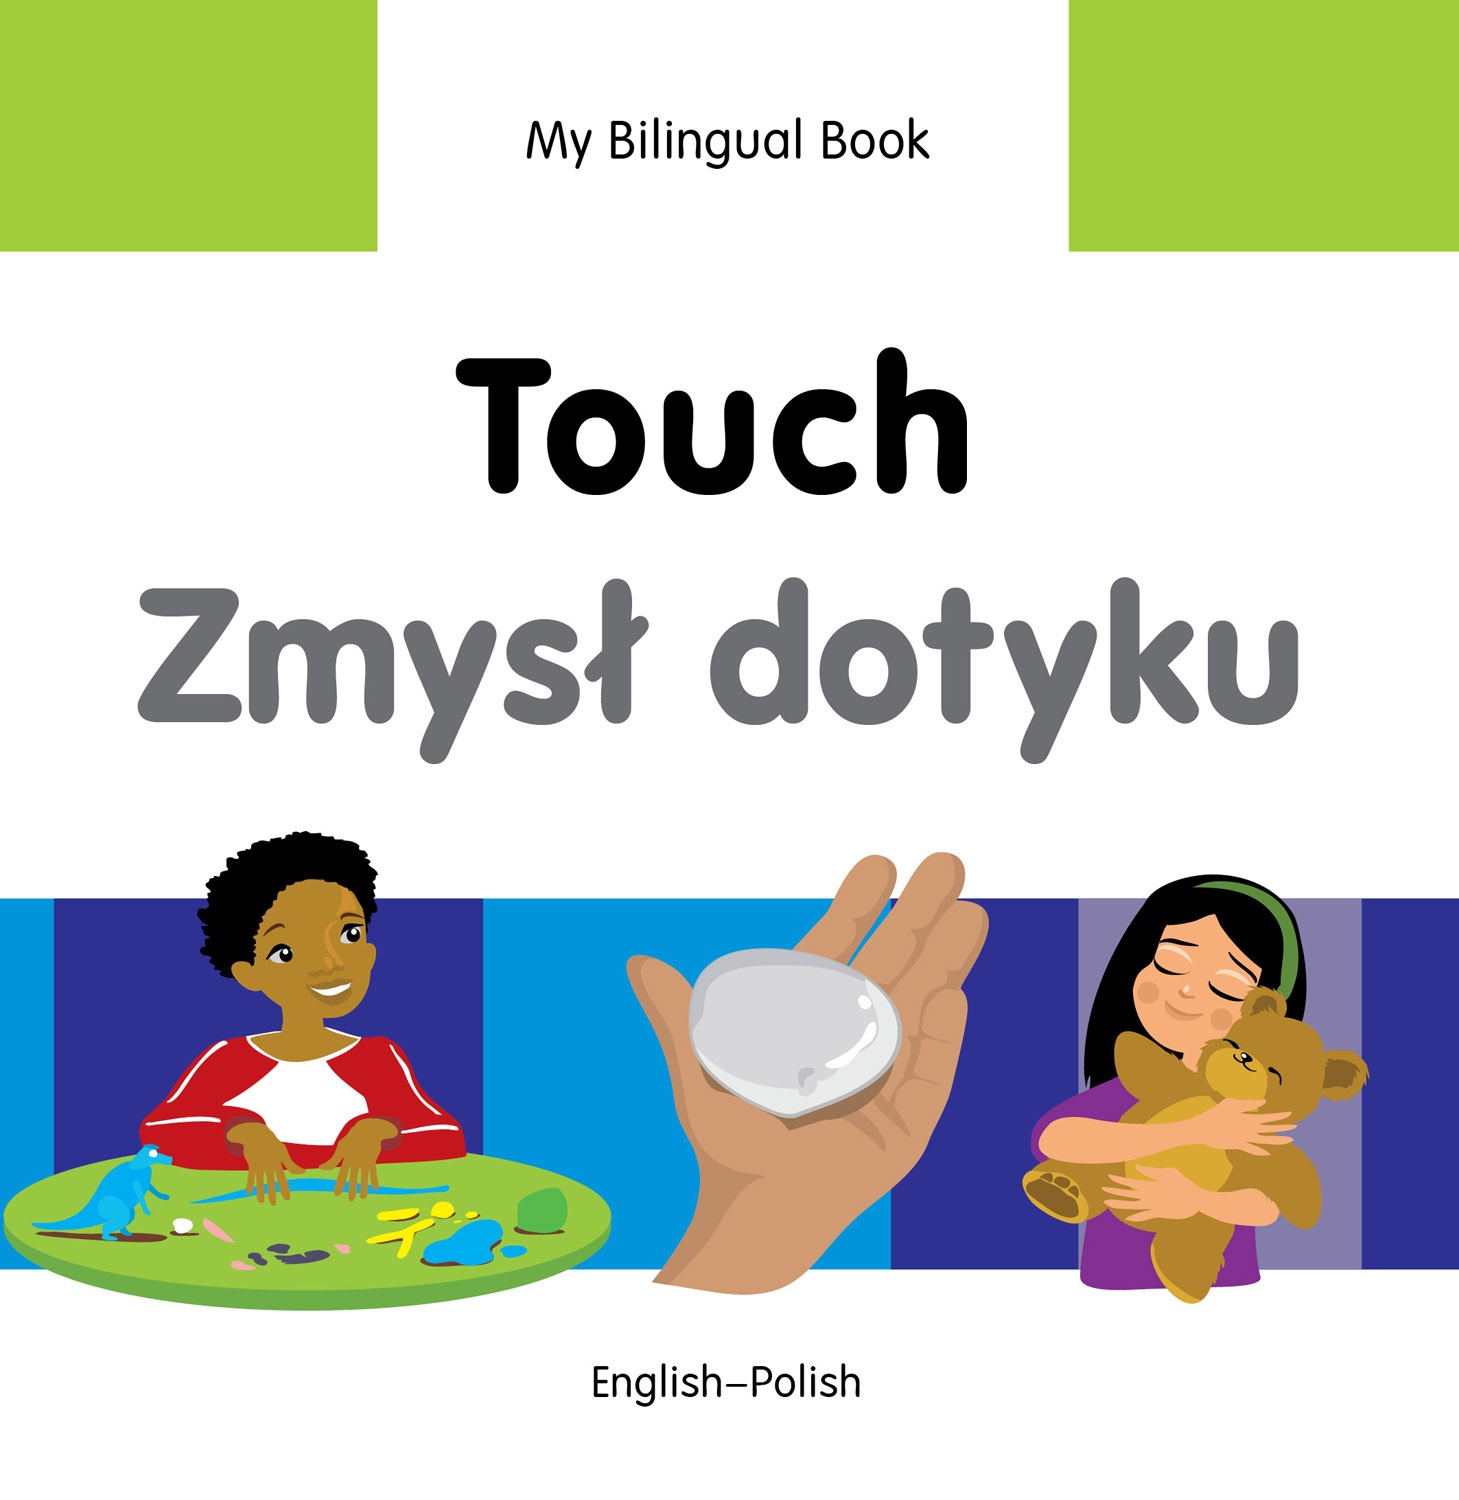 My Bilingual Book – Touch